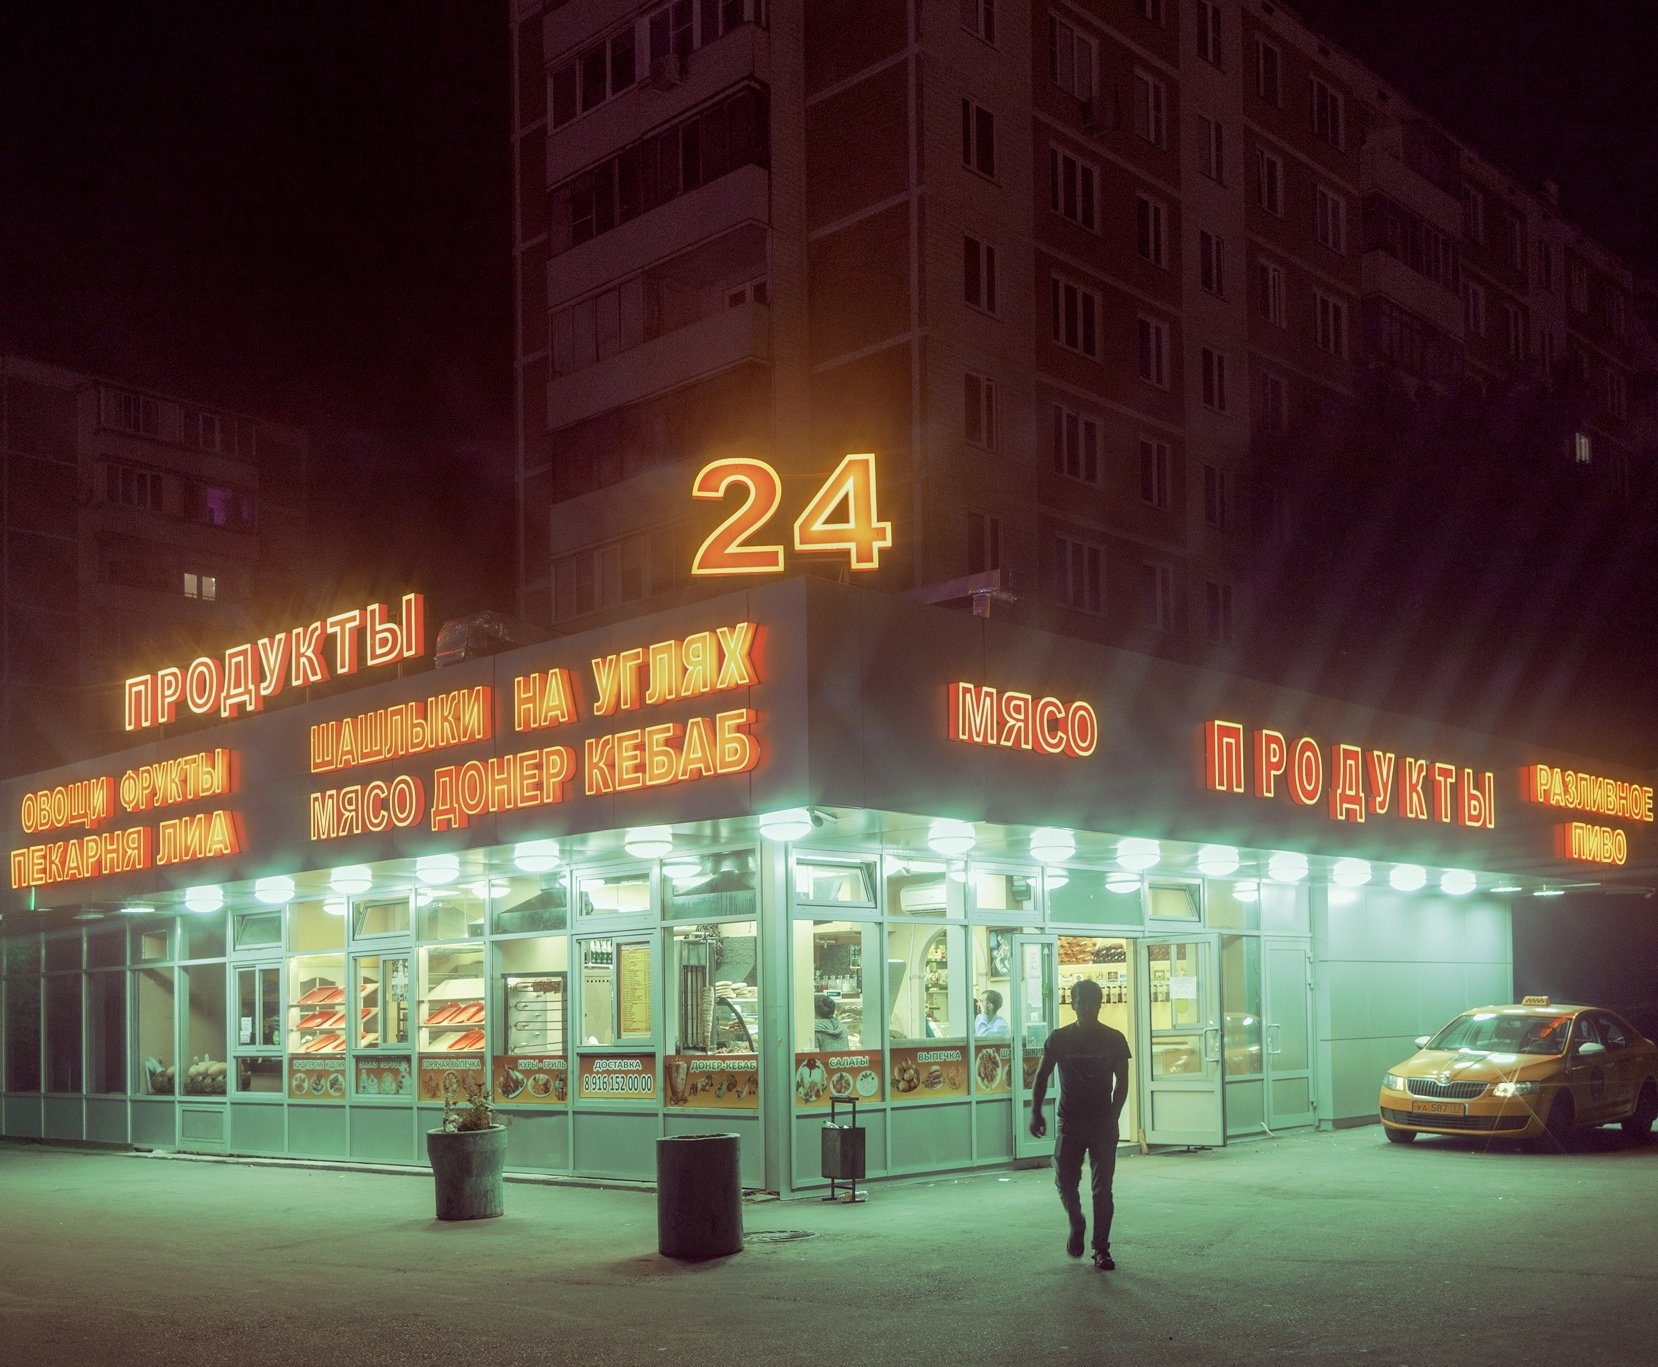 Explore neon-lit, cyberpunk Moscow suburbs with this Bladerunner-inspired photographer